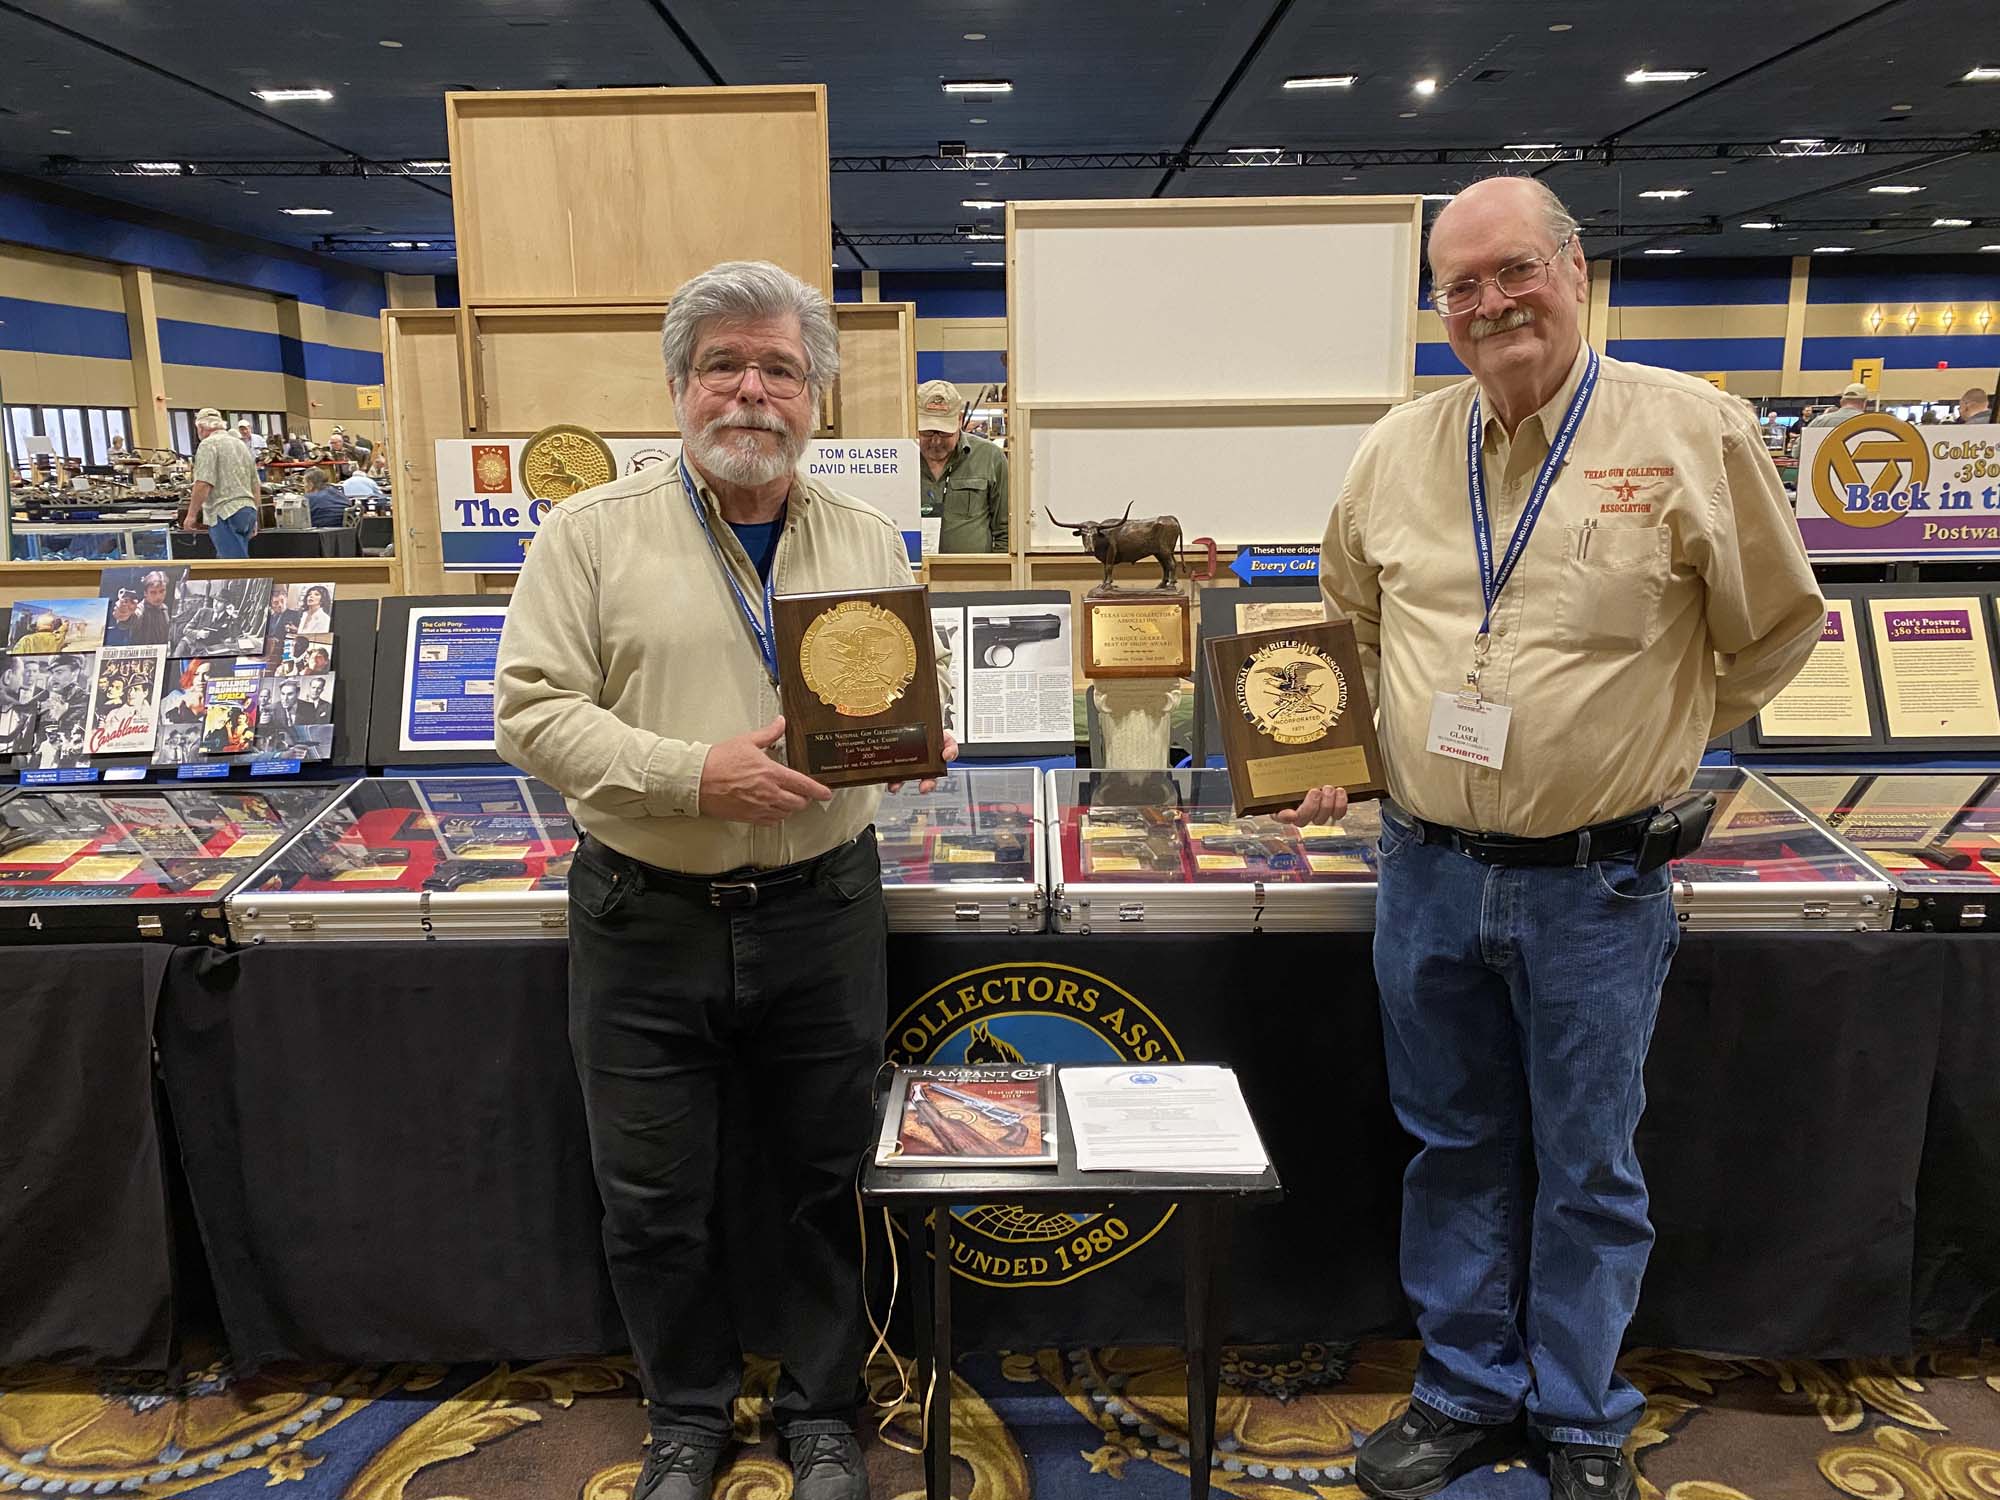 25th Annual NRA National Gun Collectors Show Awards - Tom Glaser & David Helber - Combined Arms Outstanding Exhibit Award